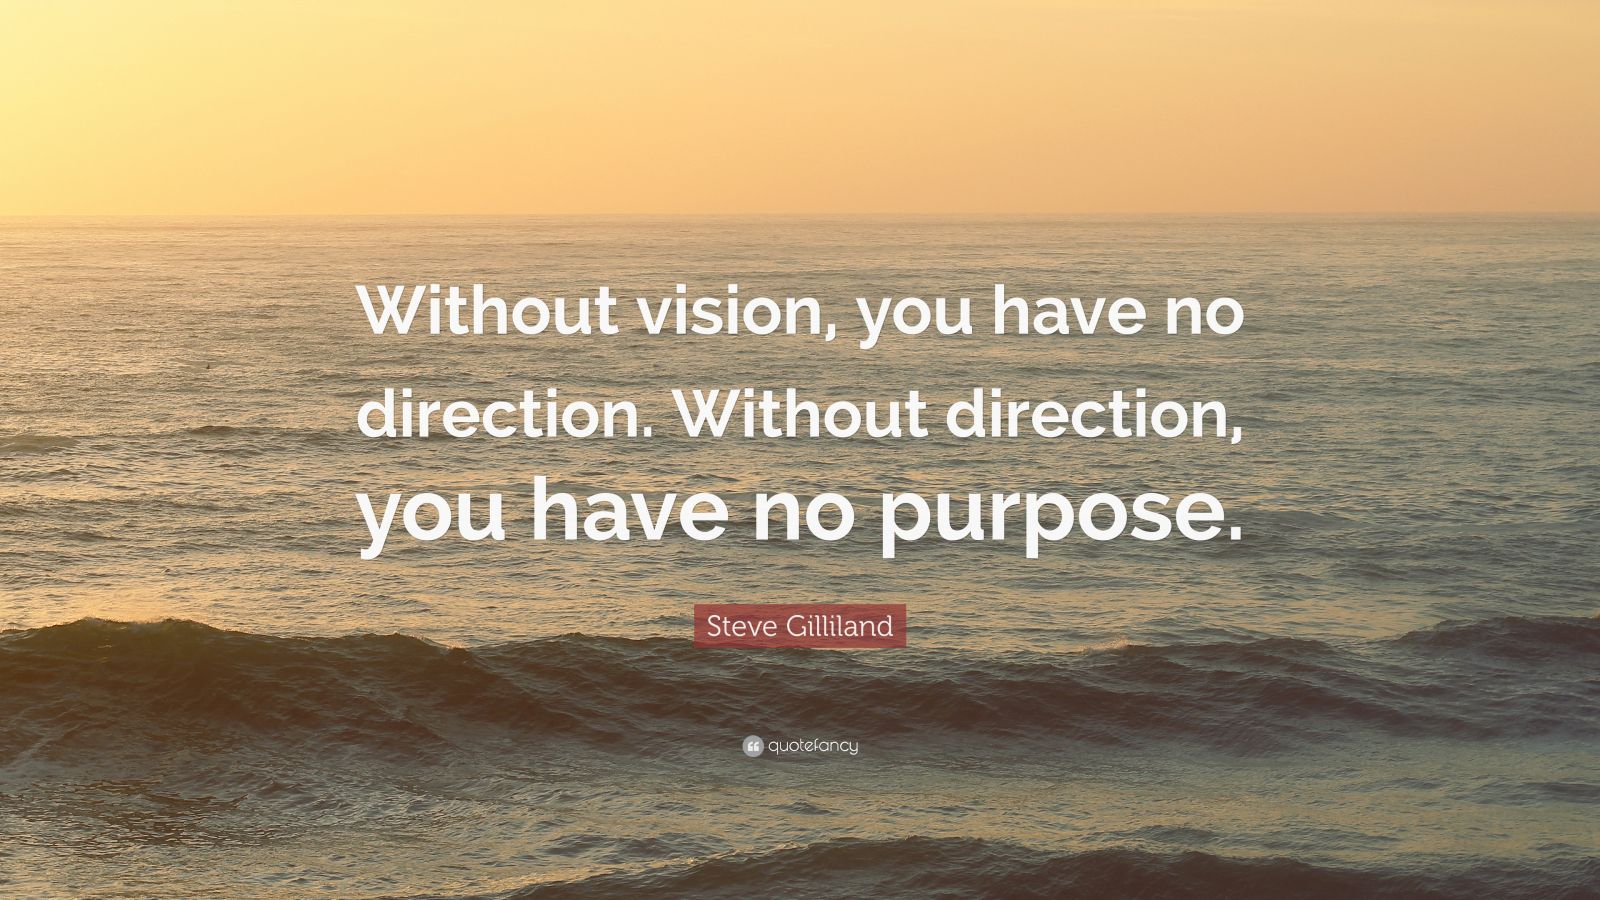 Steve Gilliland Quote: “Without vision, you have no direction. Without